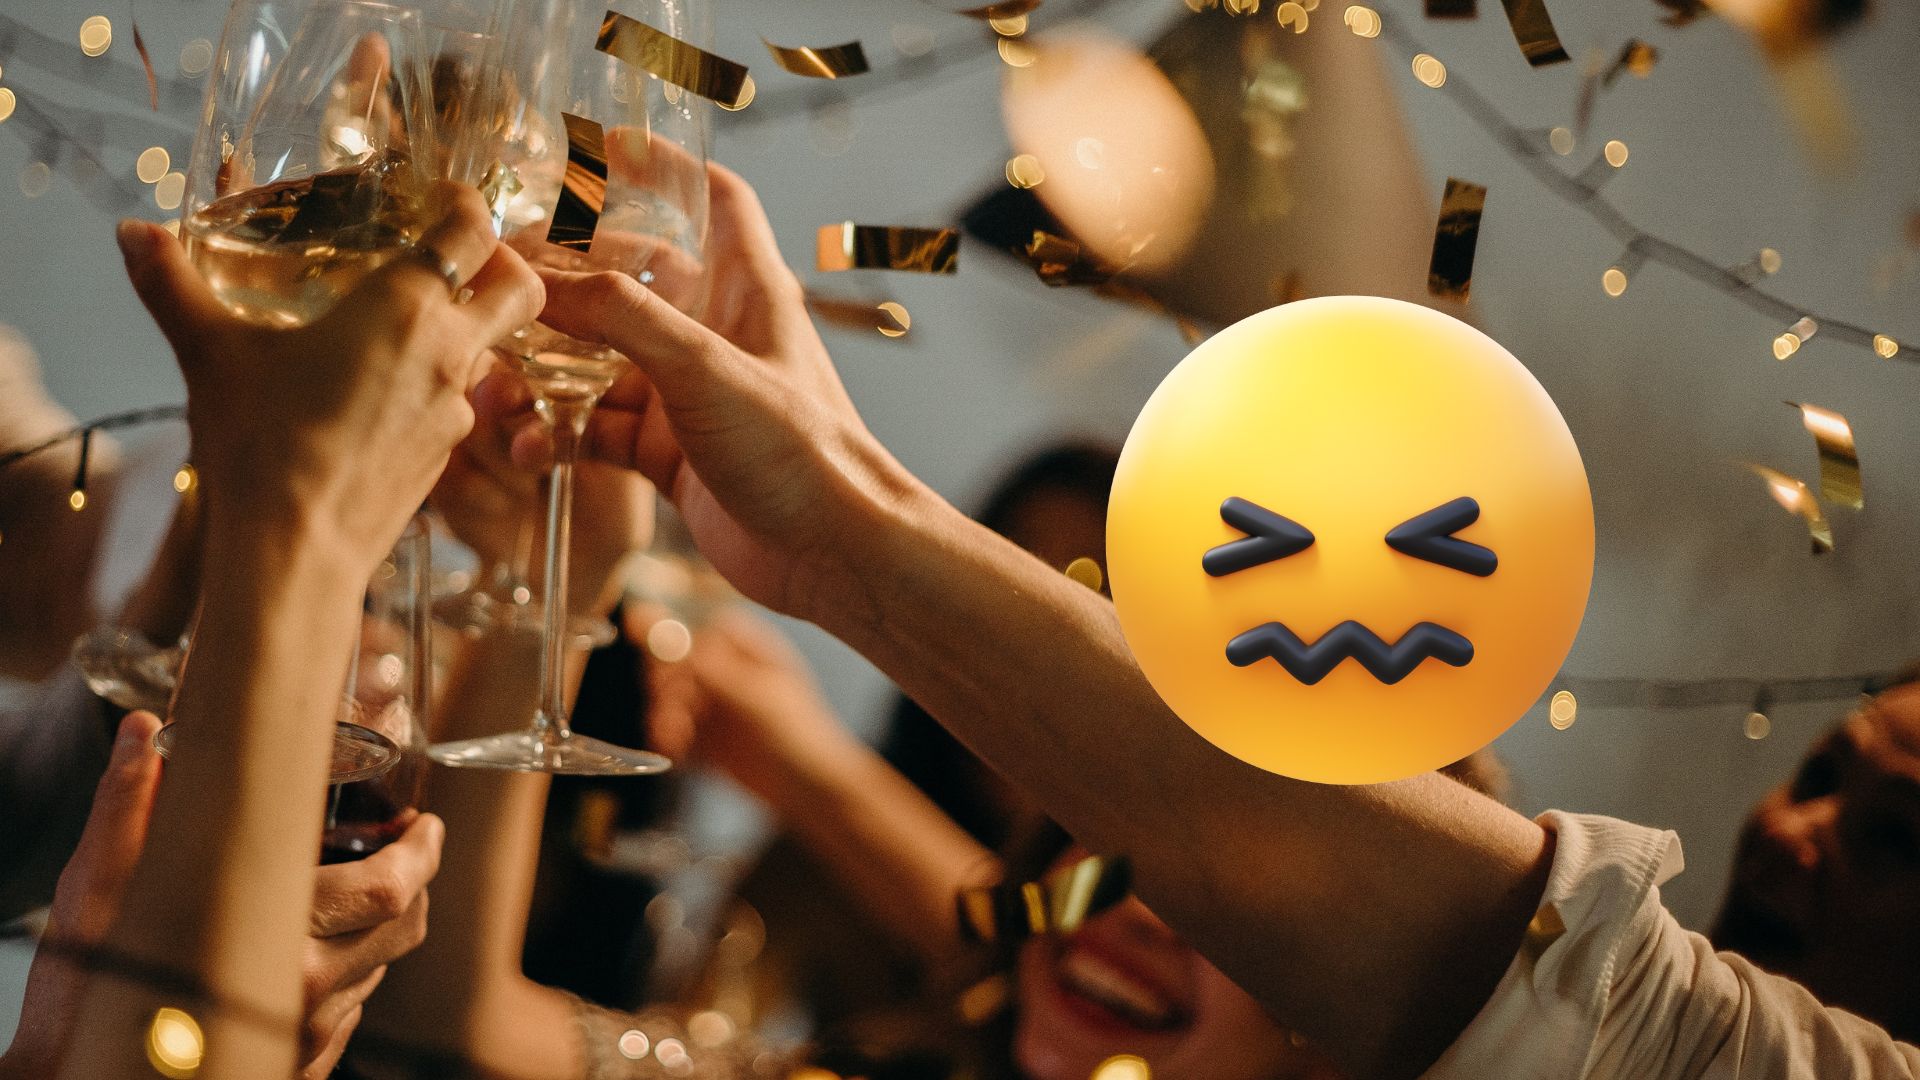 an image of a party with an emoji depicting being overstimulated